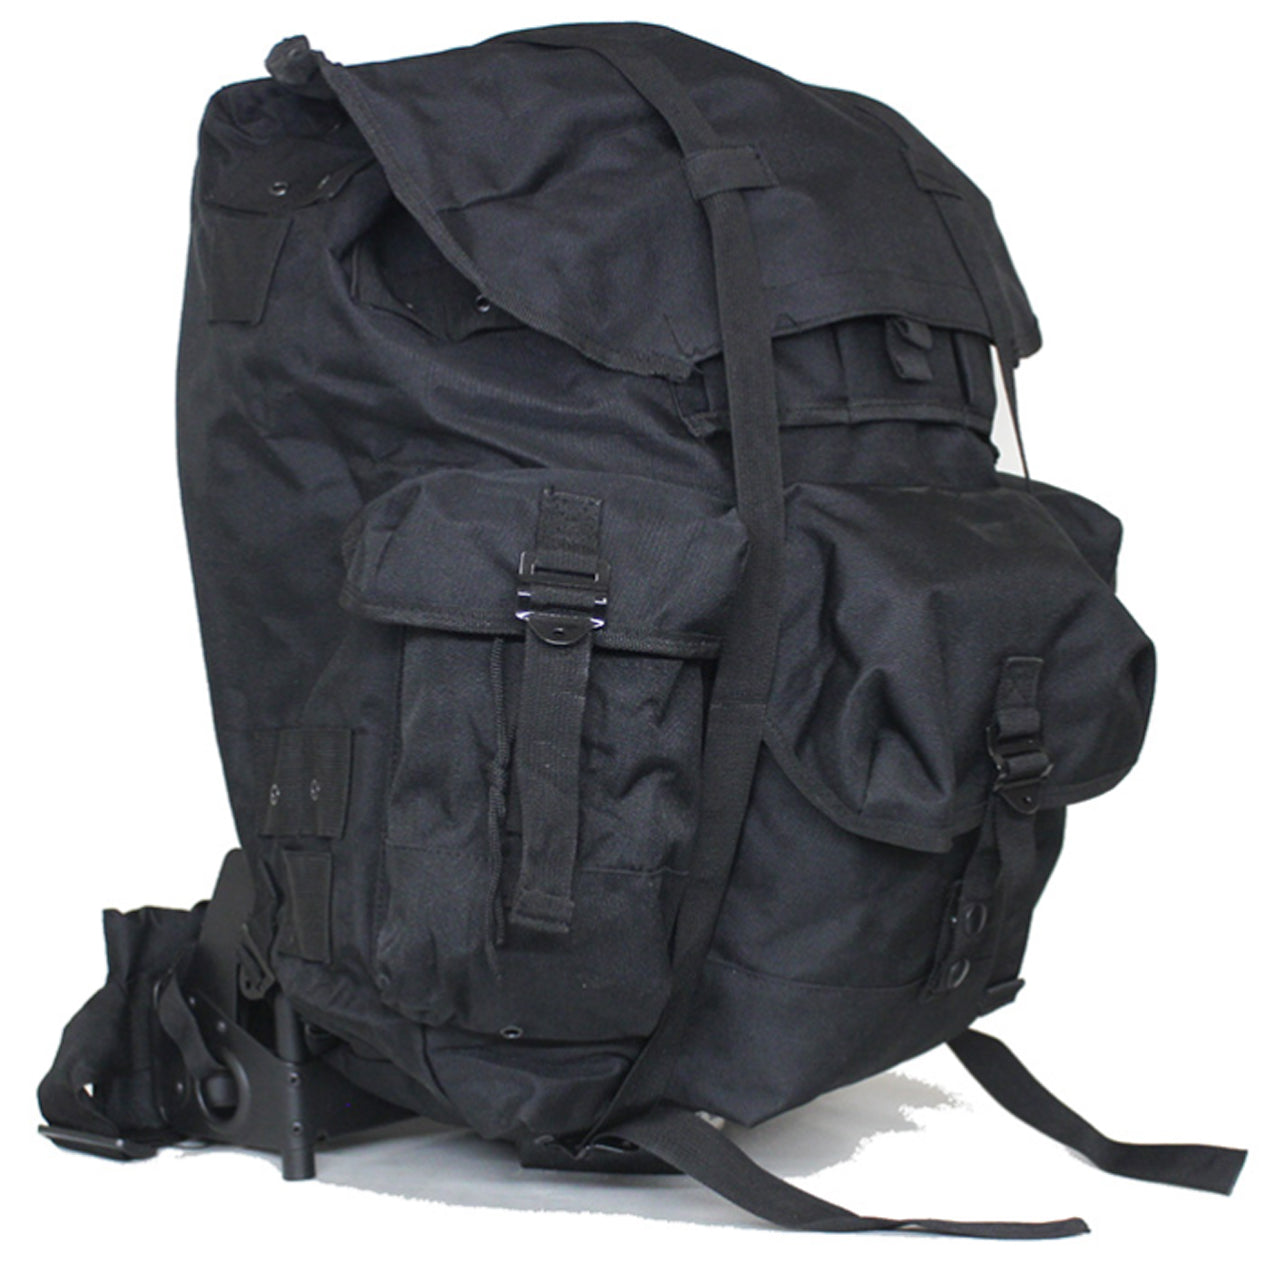 Alice Pack Black Large With Frame And Straps – Defence Q Store